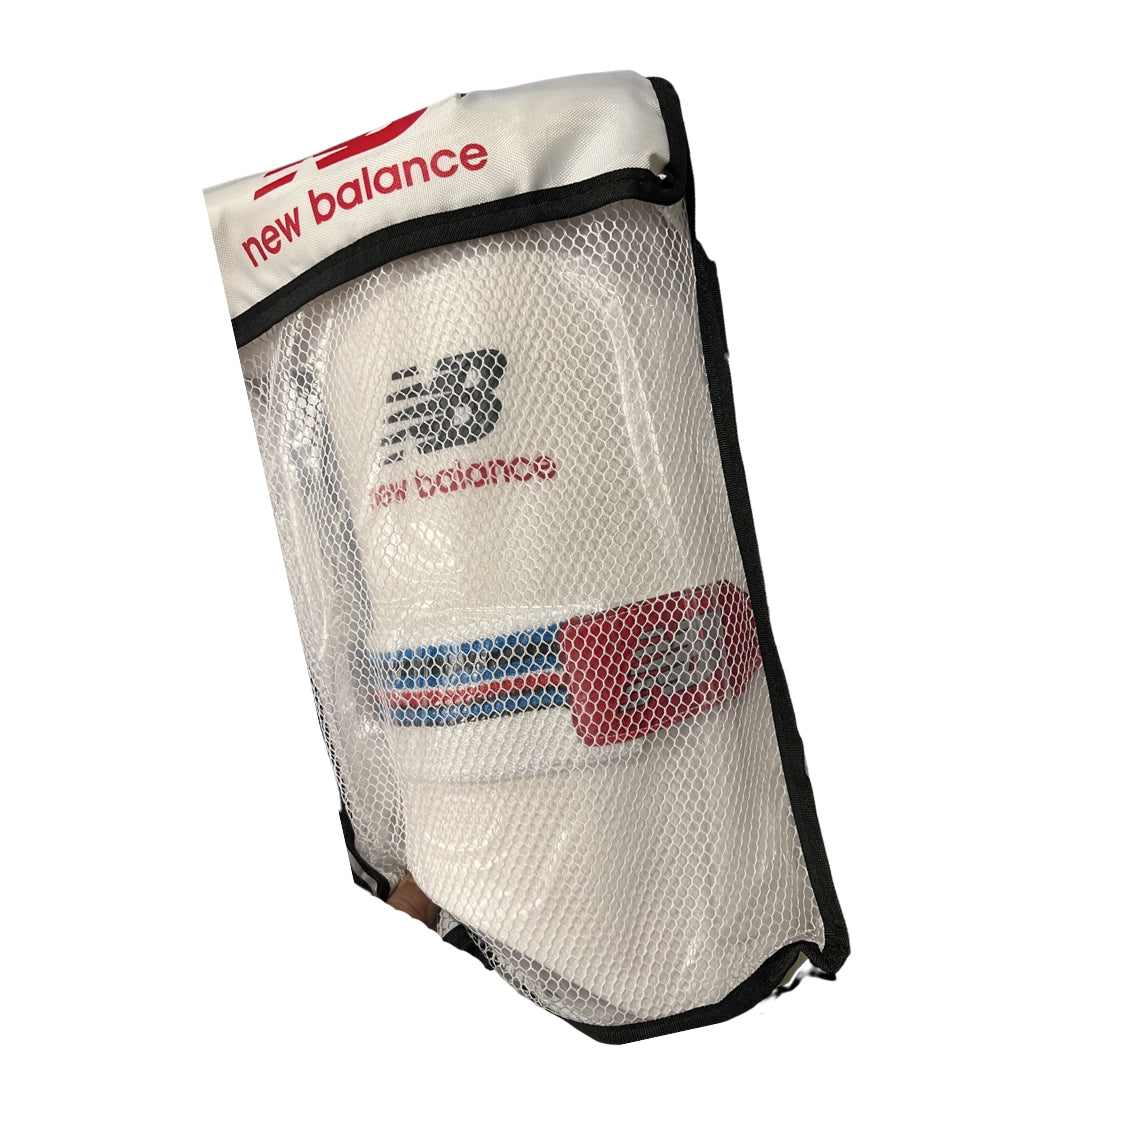 New Balance double thigh pads, 59.99 Sale price 49.23